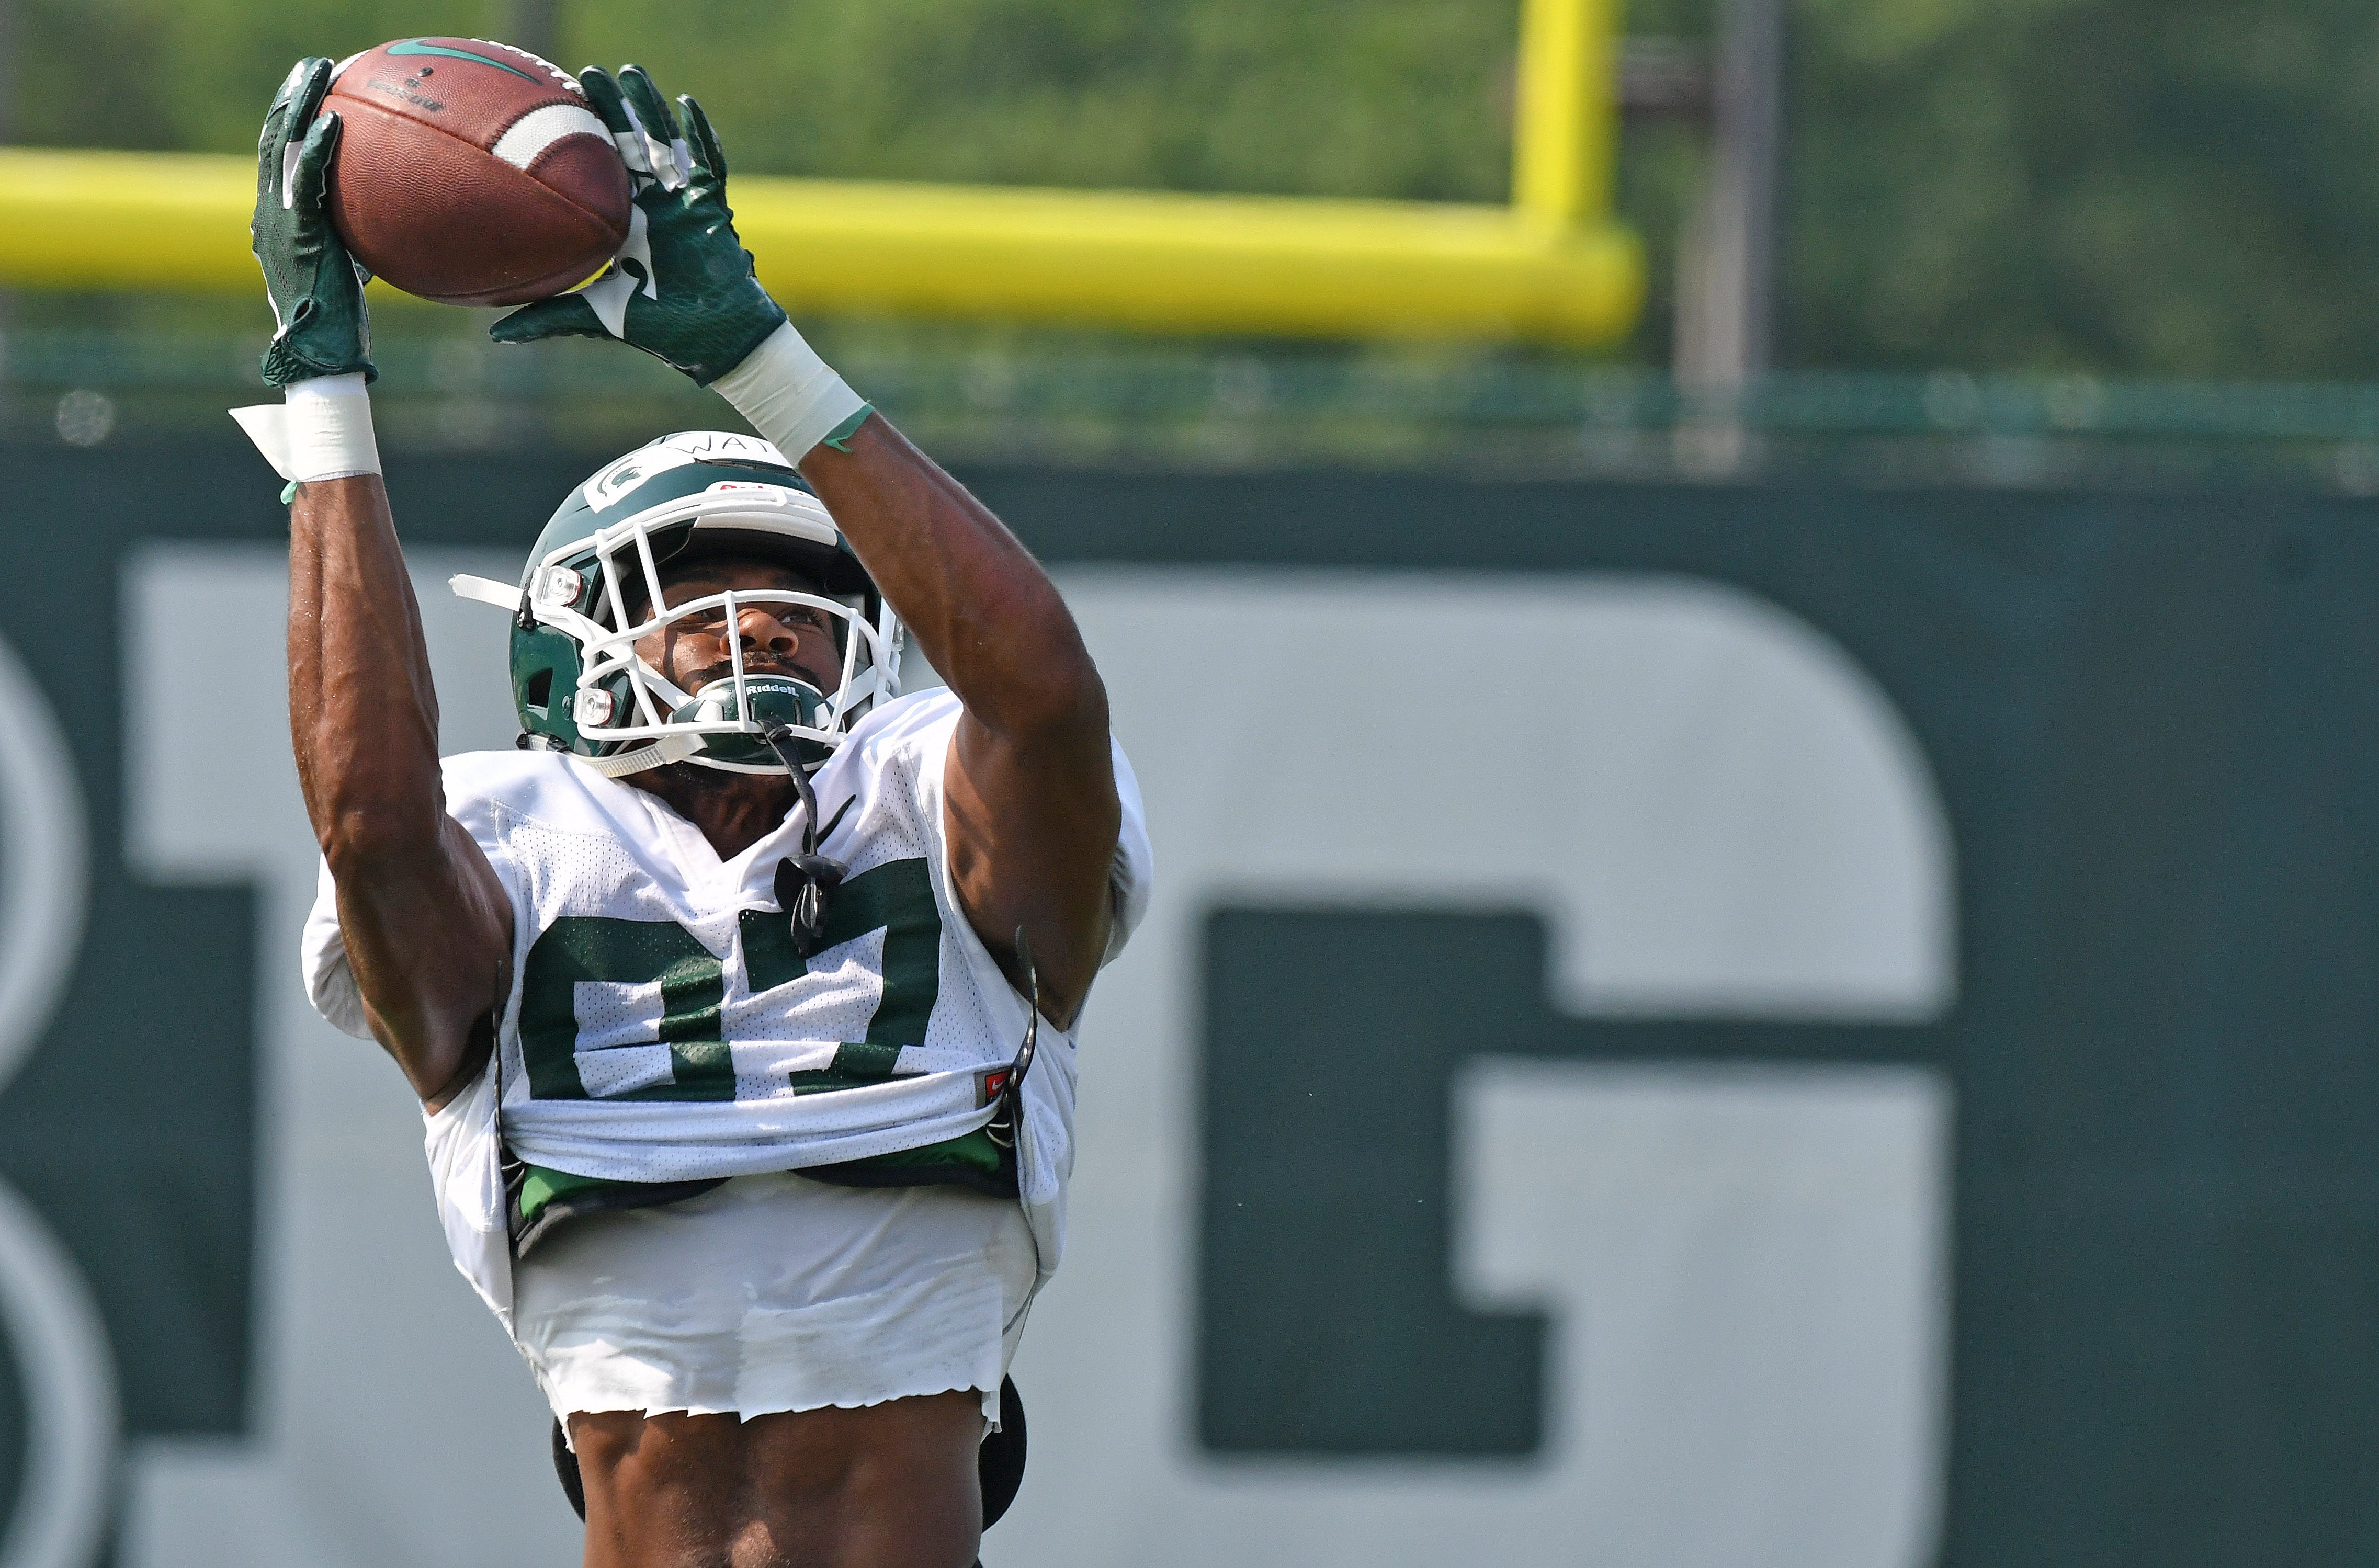 Michigan State receiver Jahz Watts pulls down a pass over his head.